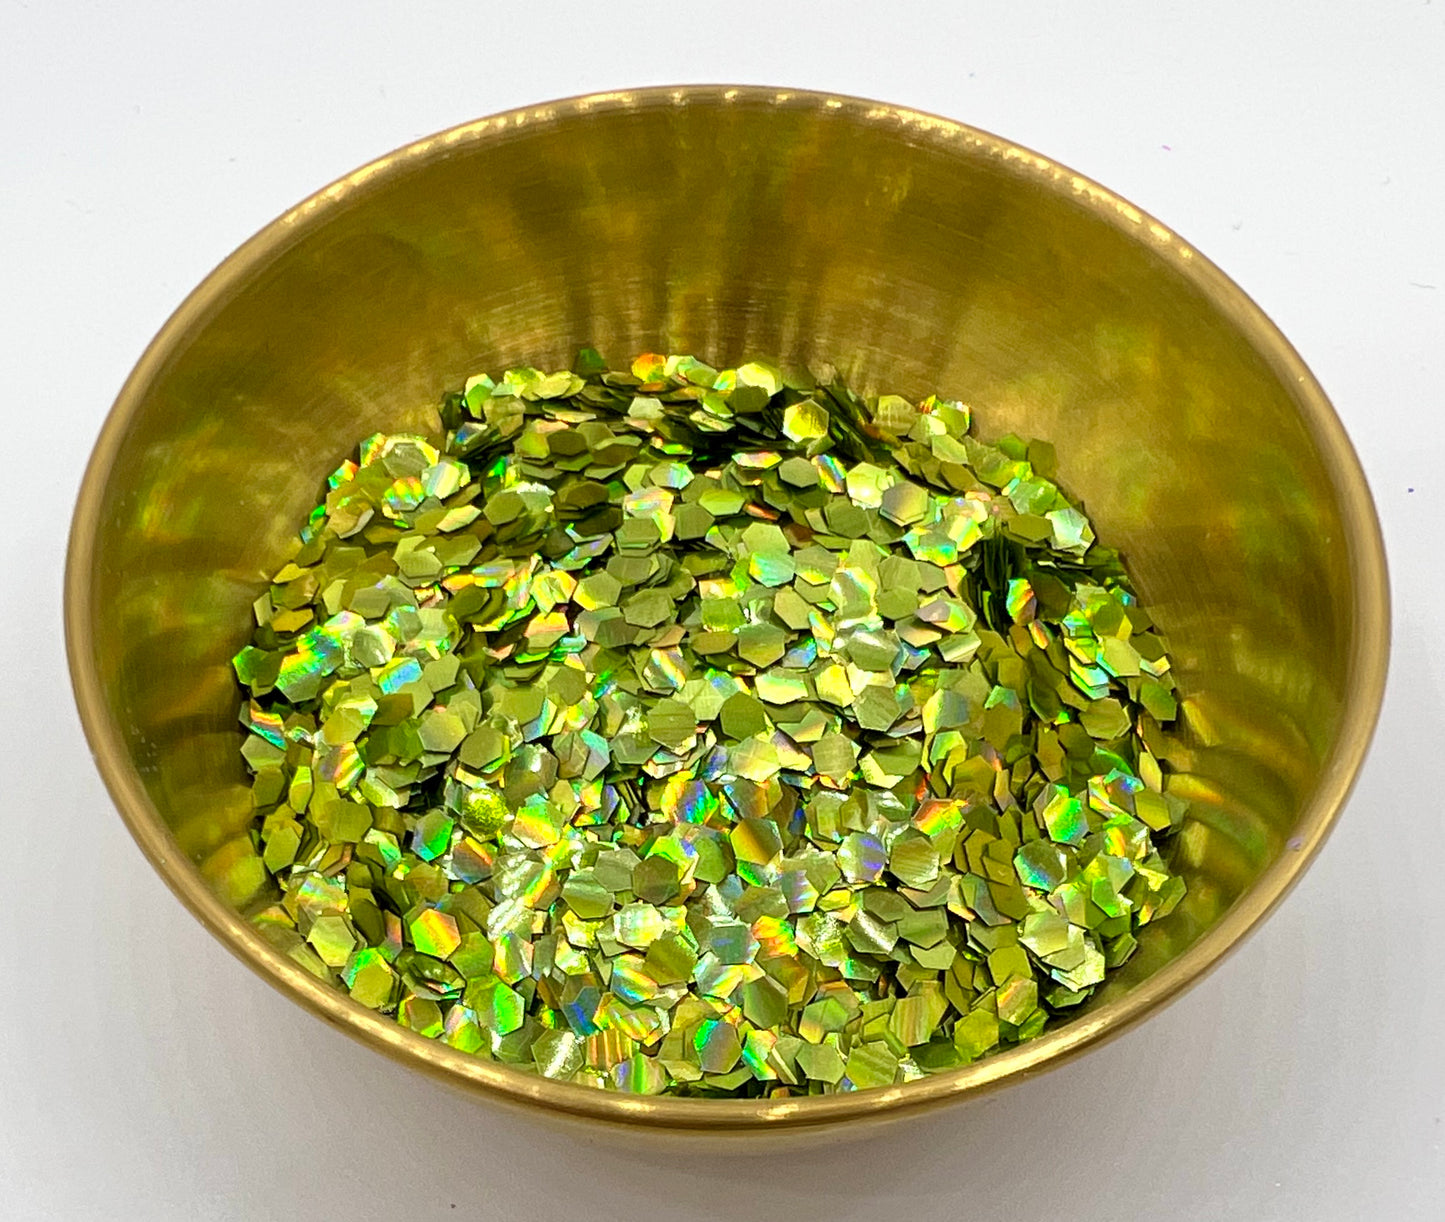 Holo Green Day Super Chunky Holographic Biodegradable Glitter